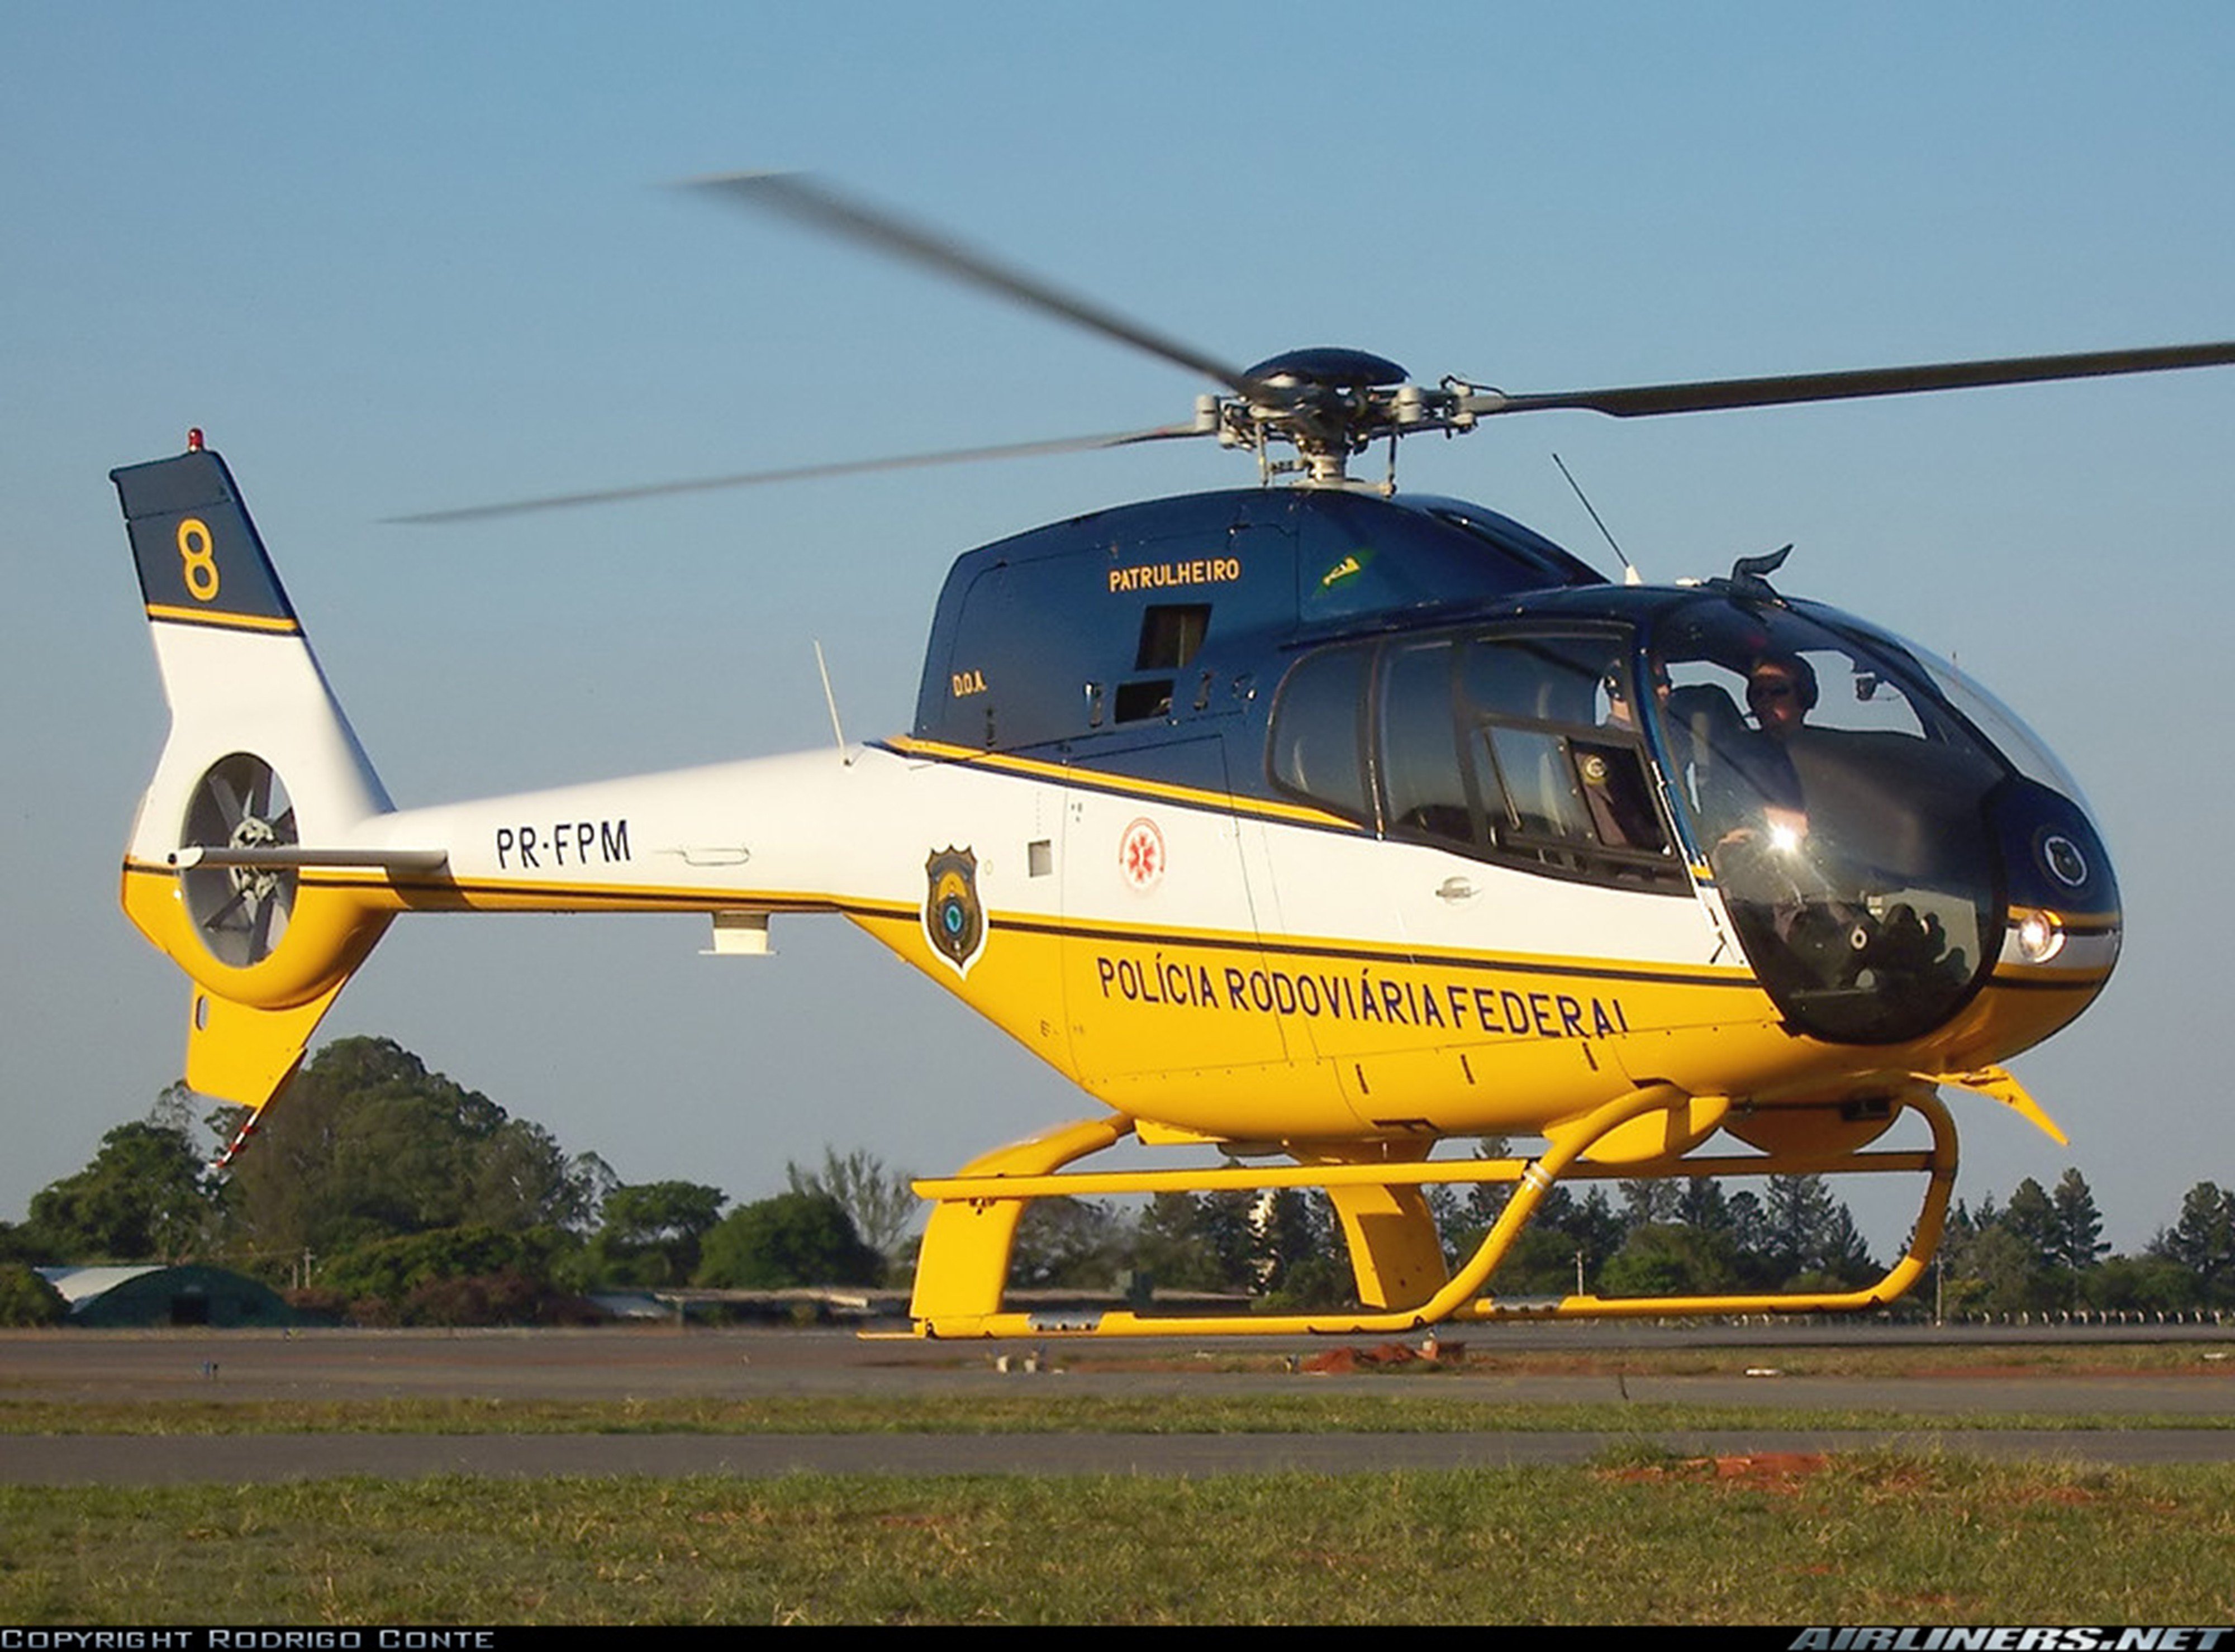 helicopter, Aircraft, Federal, Police, Highway, Brazil Wallpaper